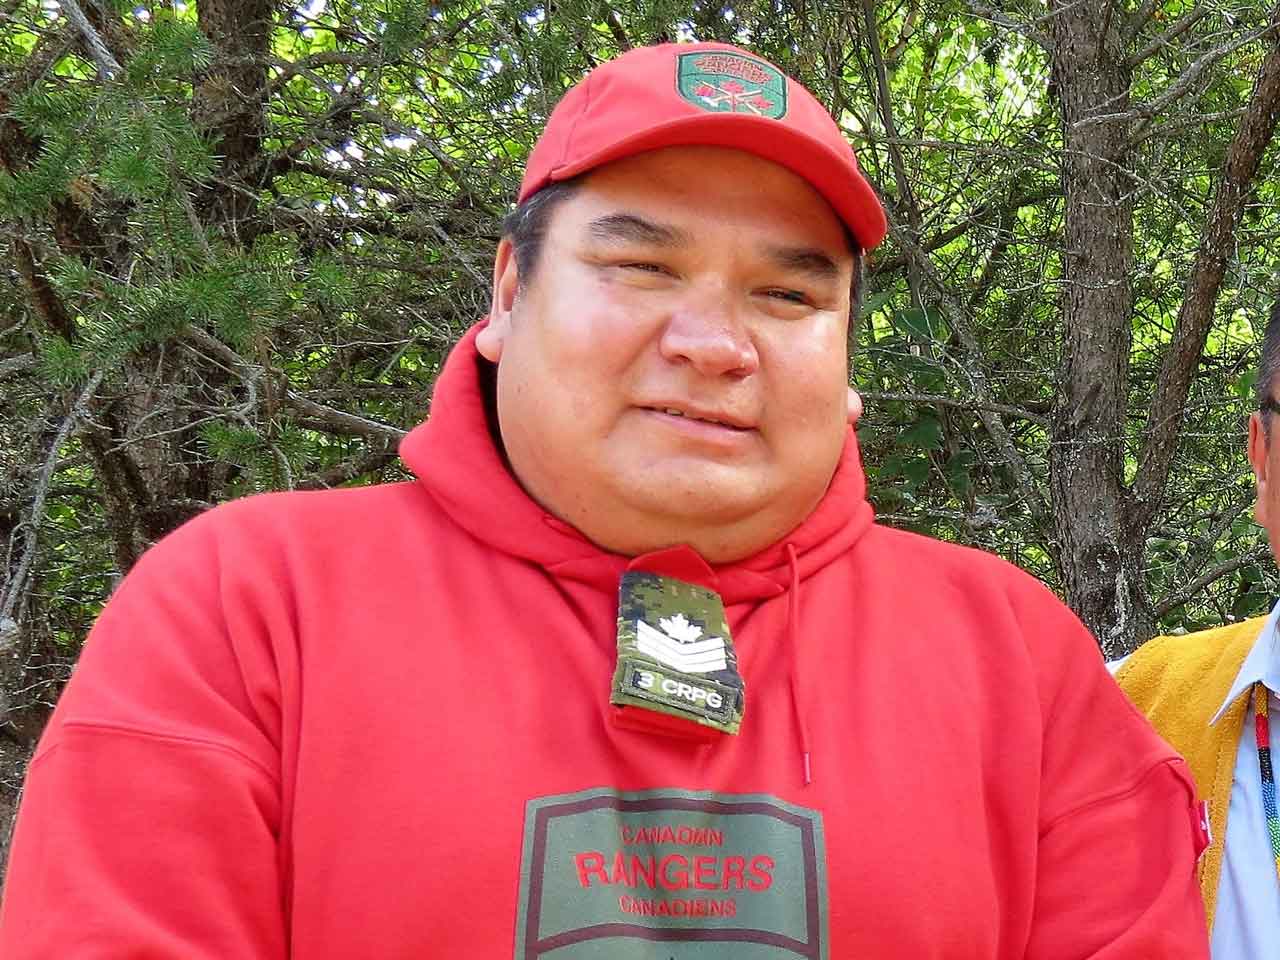 Sergeant Matthew Gull has been a Canadian Ranger for 22 years - photo Sgt. Peter Moon Canadian Rangers